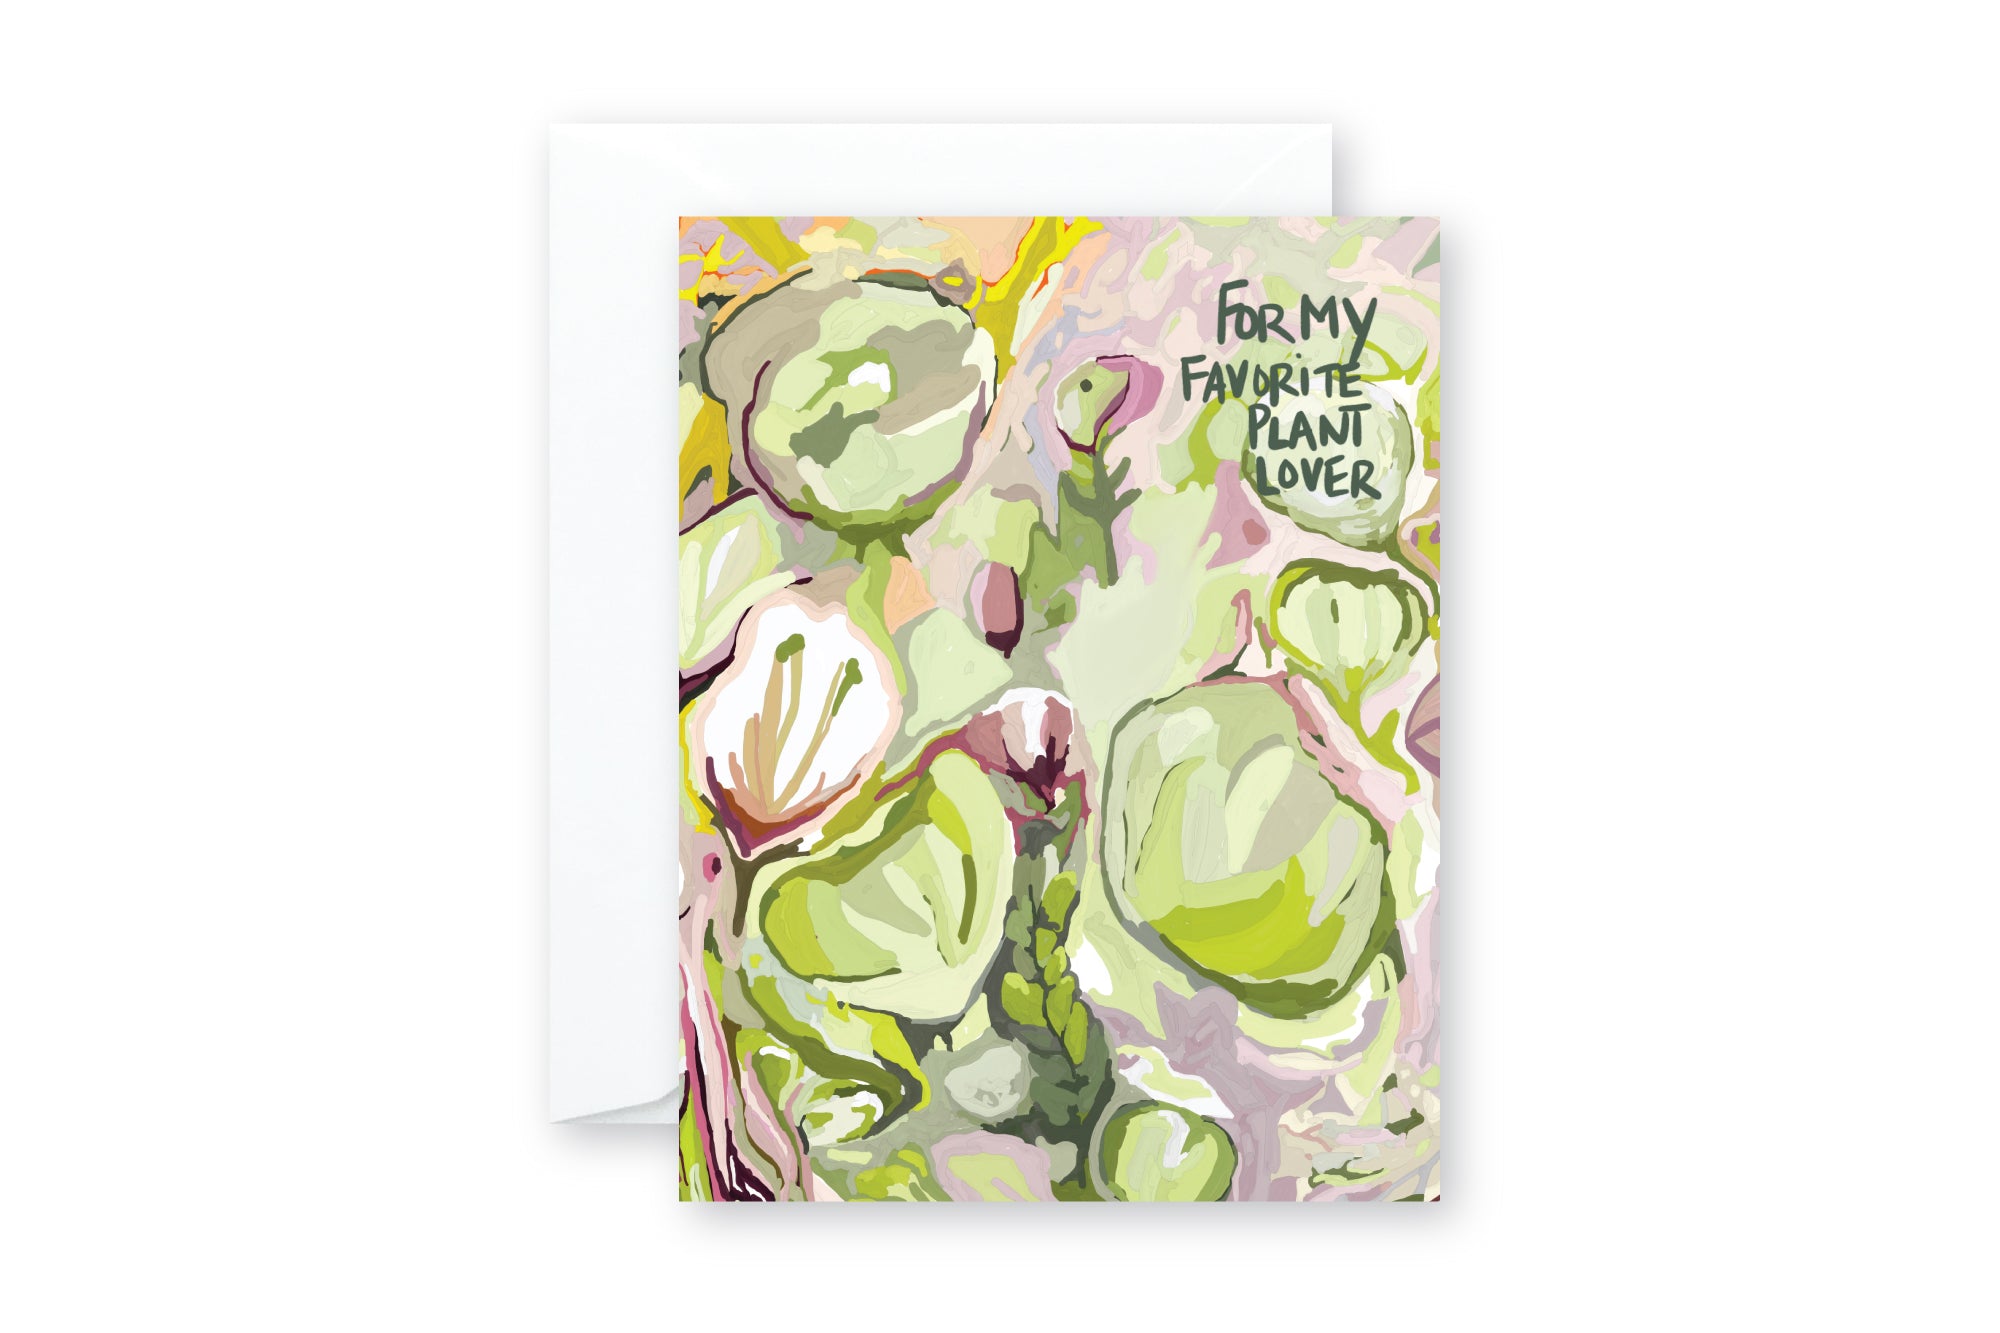 PLANT LOVER Chartreuse Floral Abstract GREETING CARD